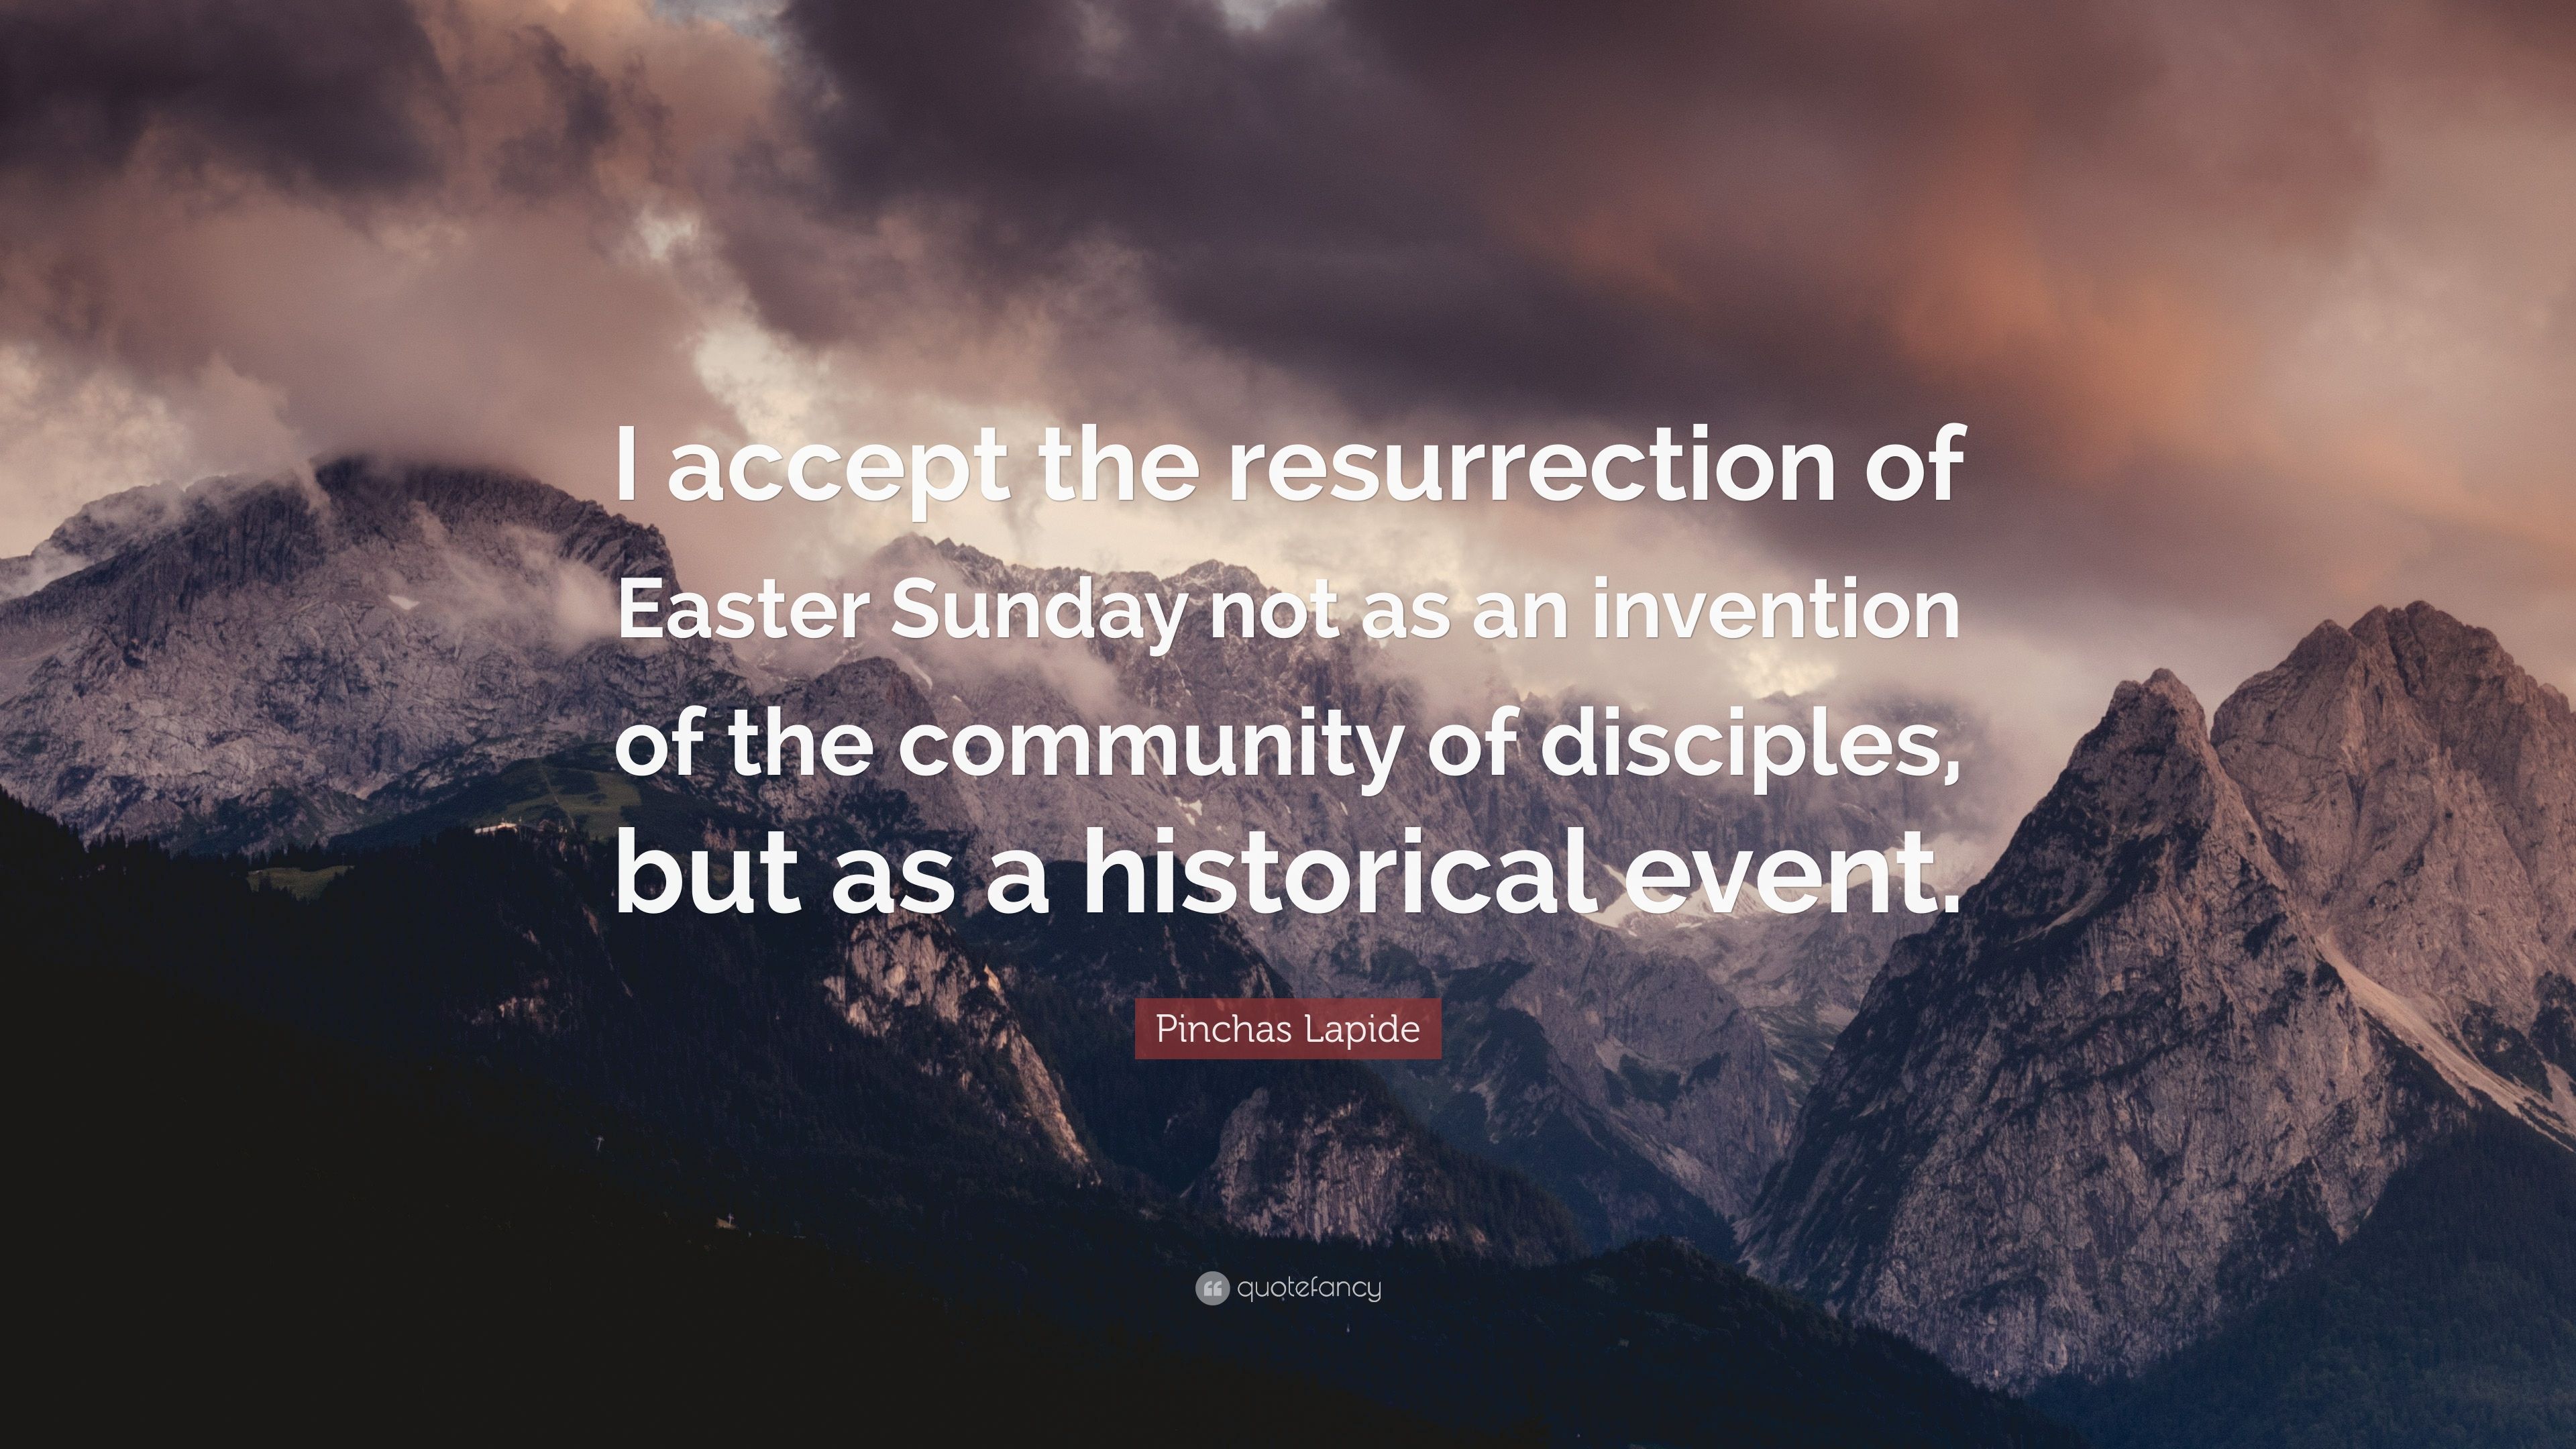 Pinchas Lapide Quote: “I accept the resurrection of Easter Sunday